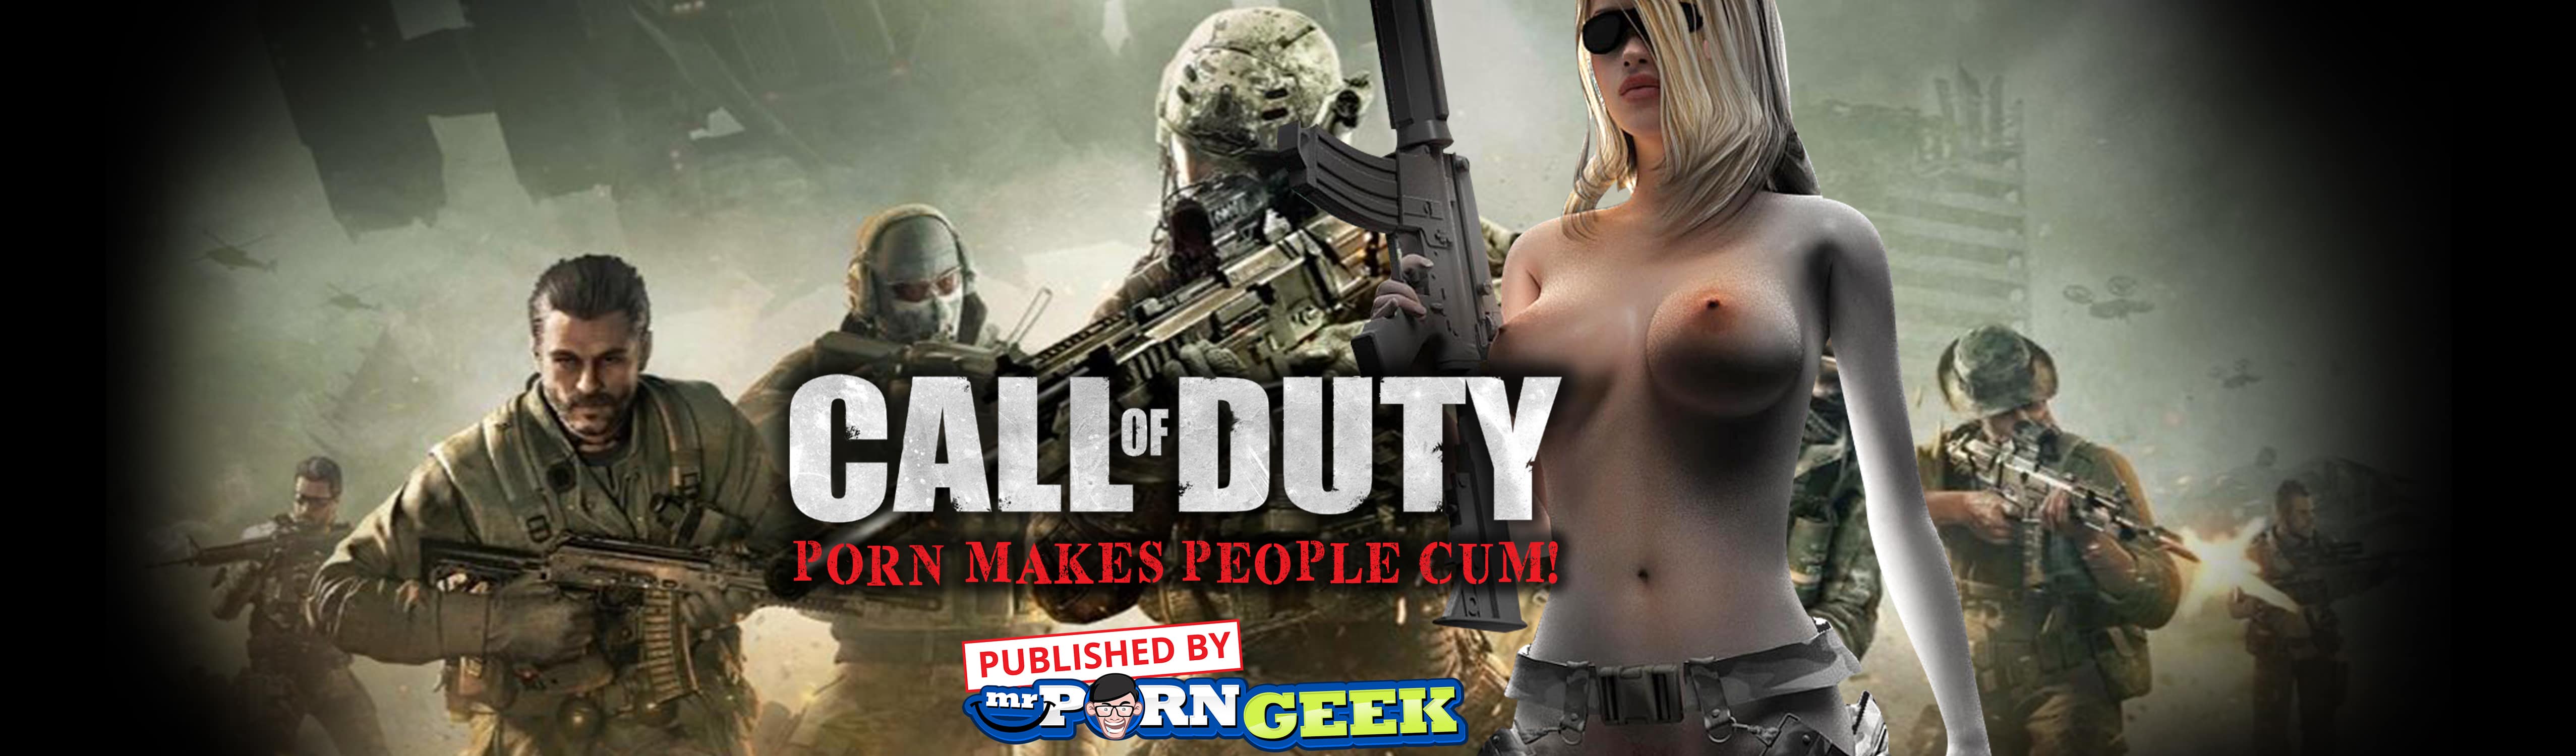 Call Of Duty Porn Makes People Cum! Find It Here